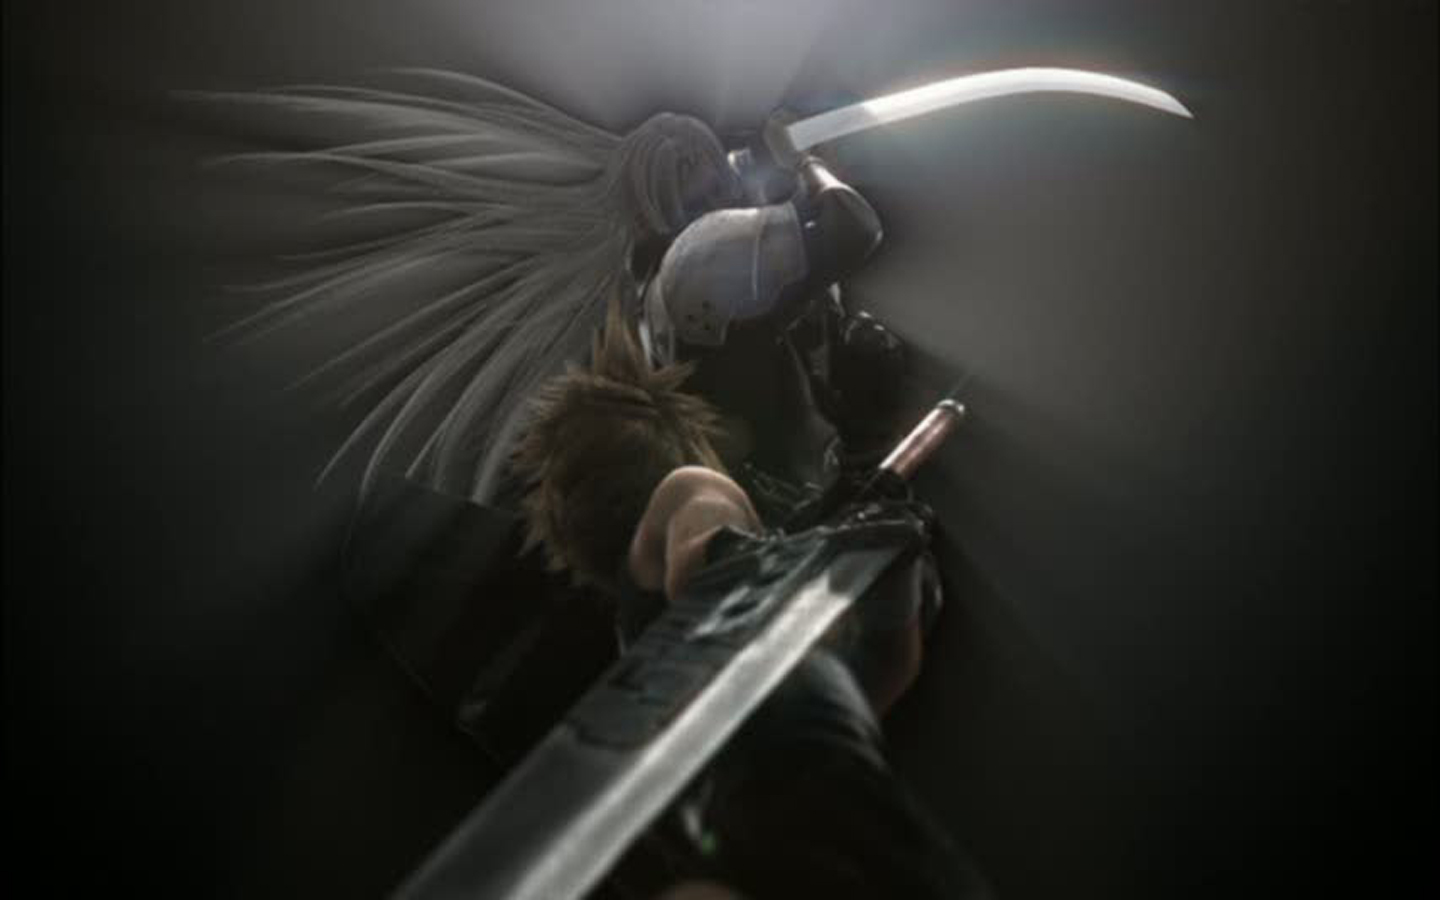 Cloud Sephiroth Wallpaper Background Square Enix Img Image Picture Pic